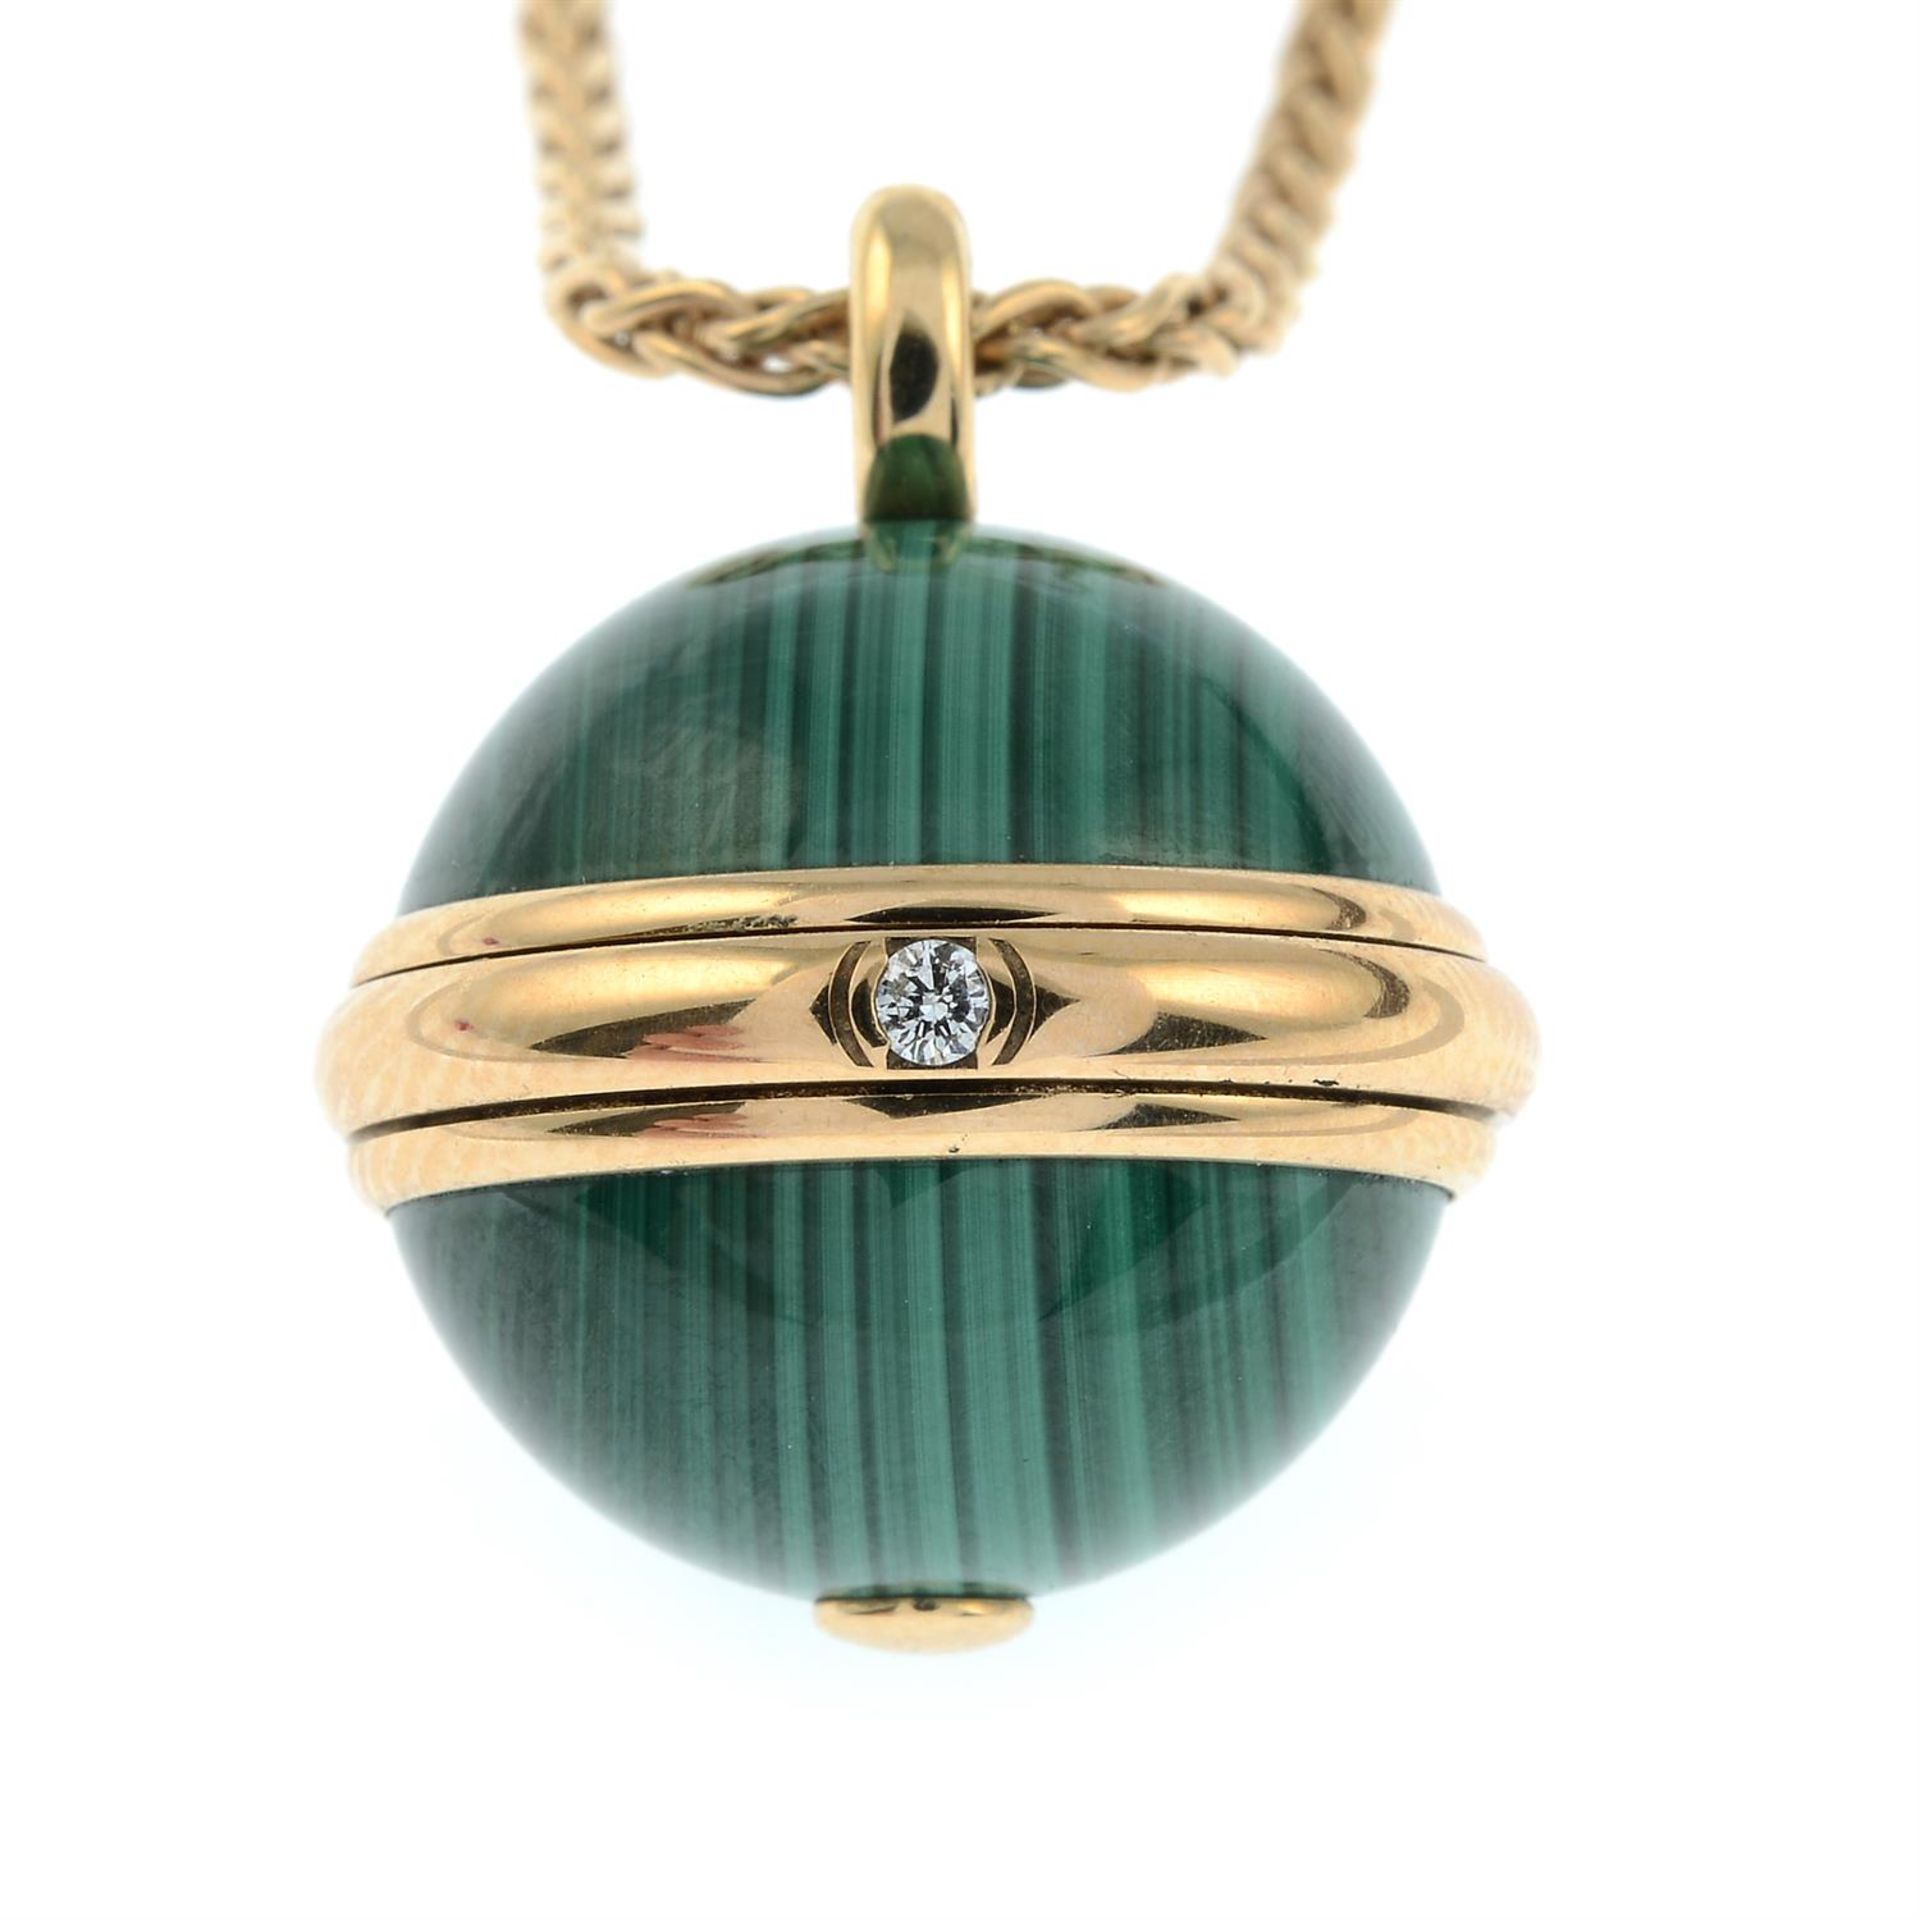 A malachite and diamond 'Posession' pendant, on chain, by Piaget. - Image 2 of 6